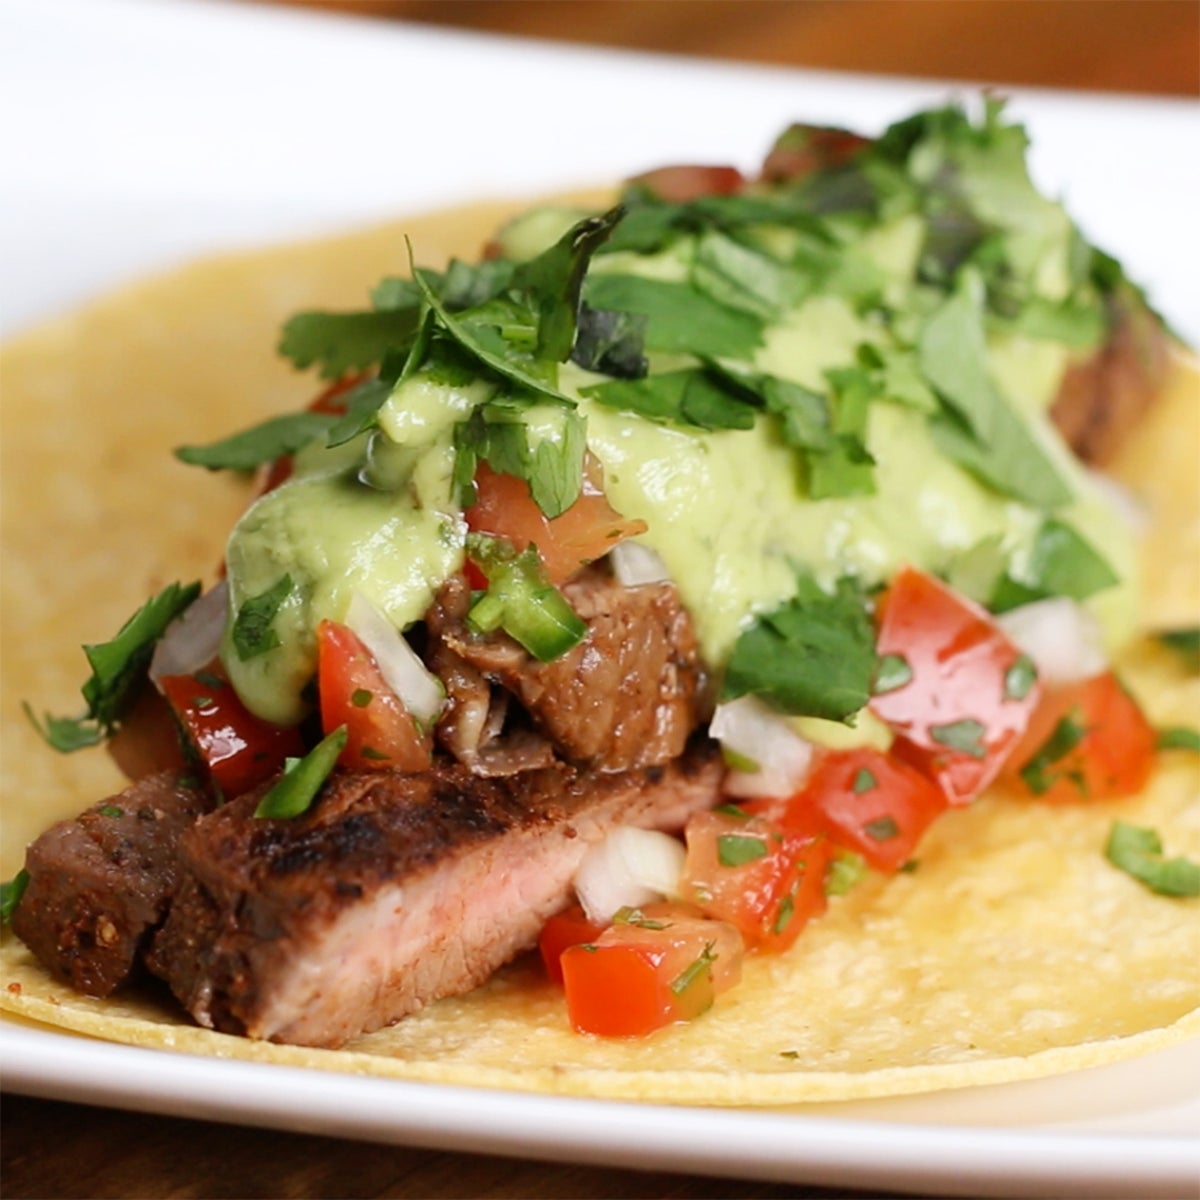 Chili Lime Steak Tacos Recipe by Tasty